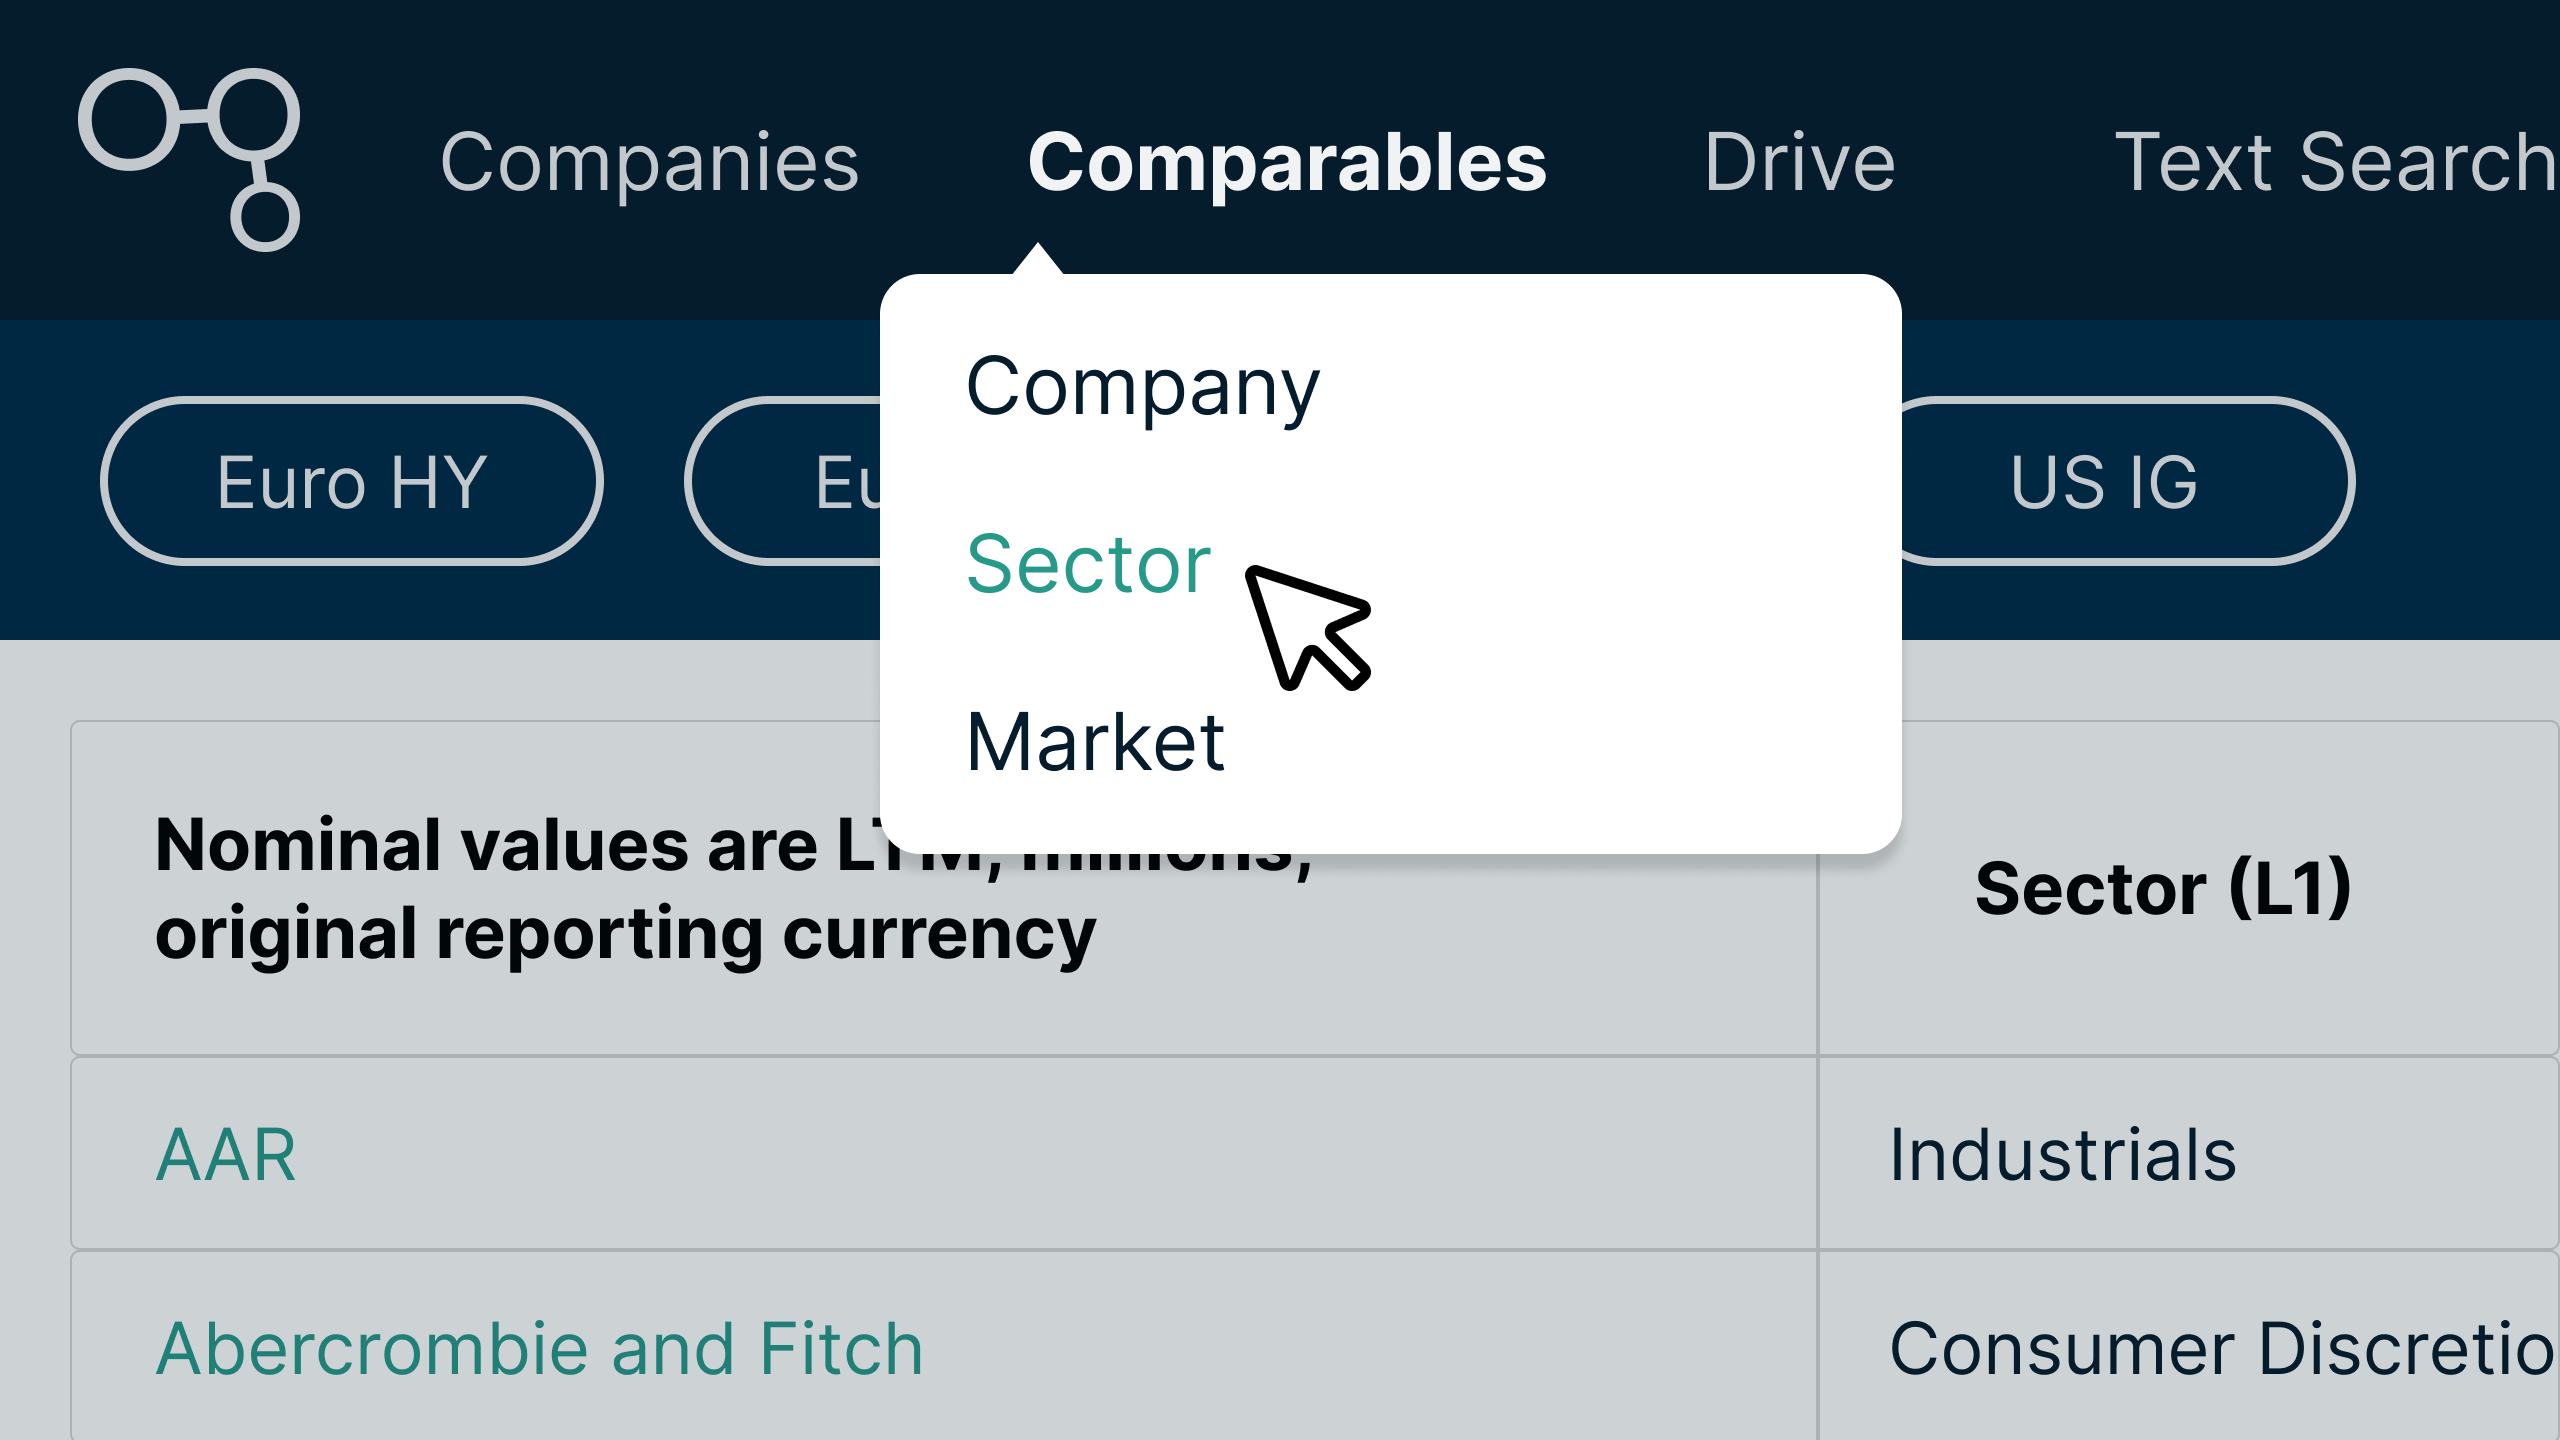 Cross-market analytics: Sector Comparables